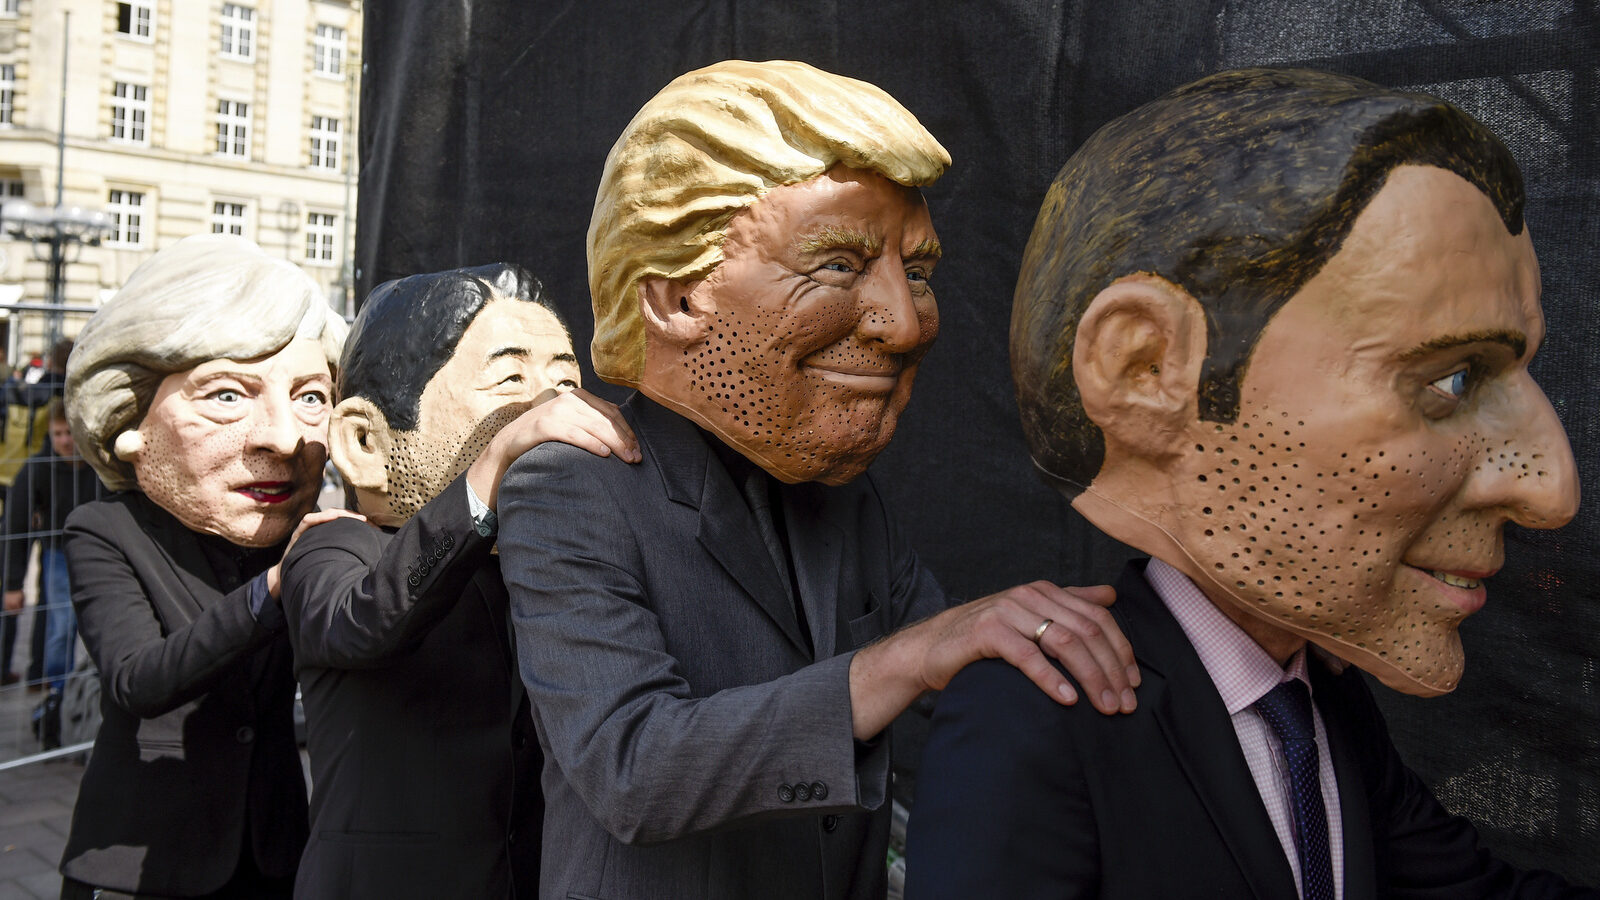 Demonstrators against the G20 Summit stand on stage wearing masks depicting from left : British Prime Minister Theresa May, Japan's Prime Minister Shinzo Abe, US President Donald Trump and French President Emmanuel Macron, in Hamburg, Germany, July 2, 2017. (Axel Heimken/AP)